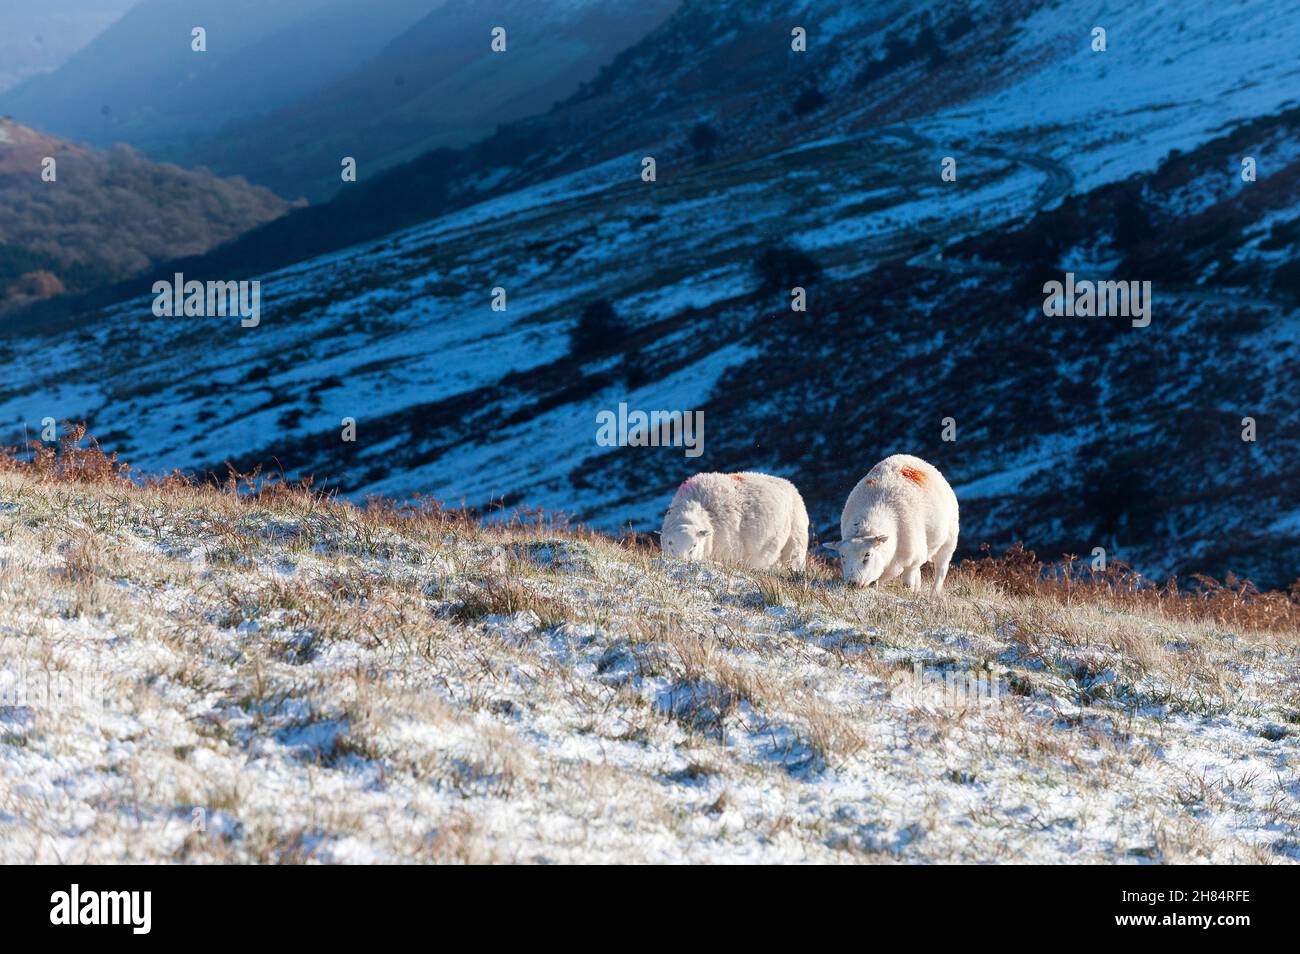 Brecon Beacons, Powys, Wales, UK. 27th Nov, 2021. Sheep forage for grass in a wintry landscape after snow fell overnight on high land in the Brecon Beacons National Park in Powys, Wales, UK Credit: Graham M. Lawrence/Alamy Live News Stock Photo